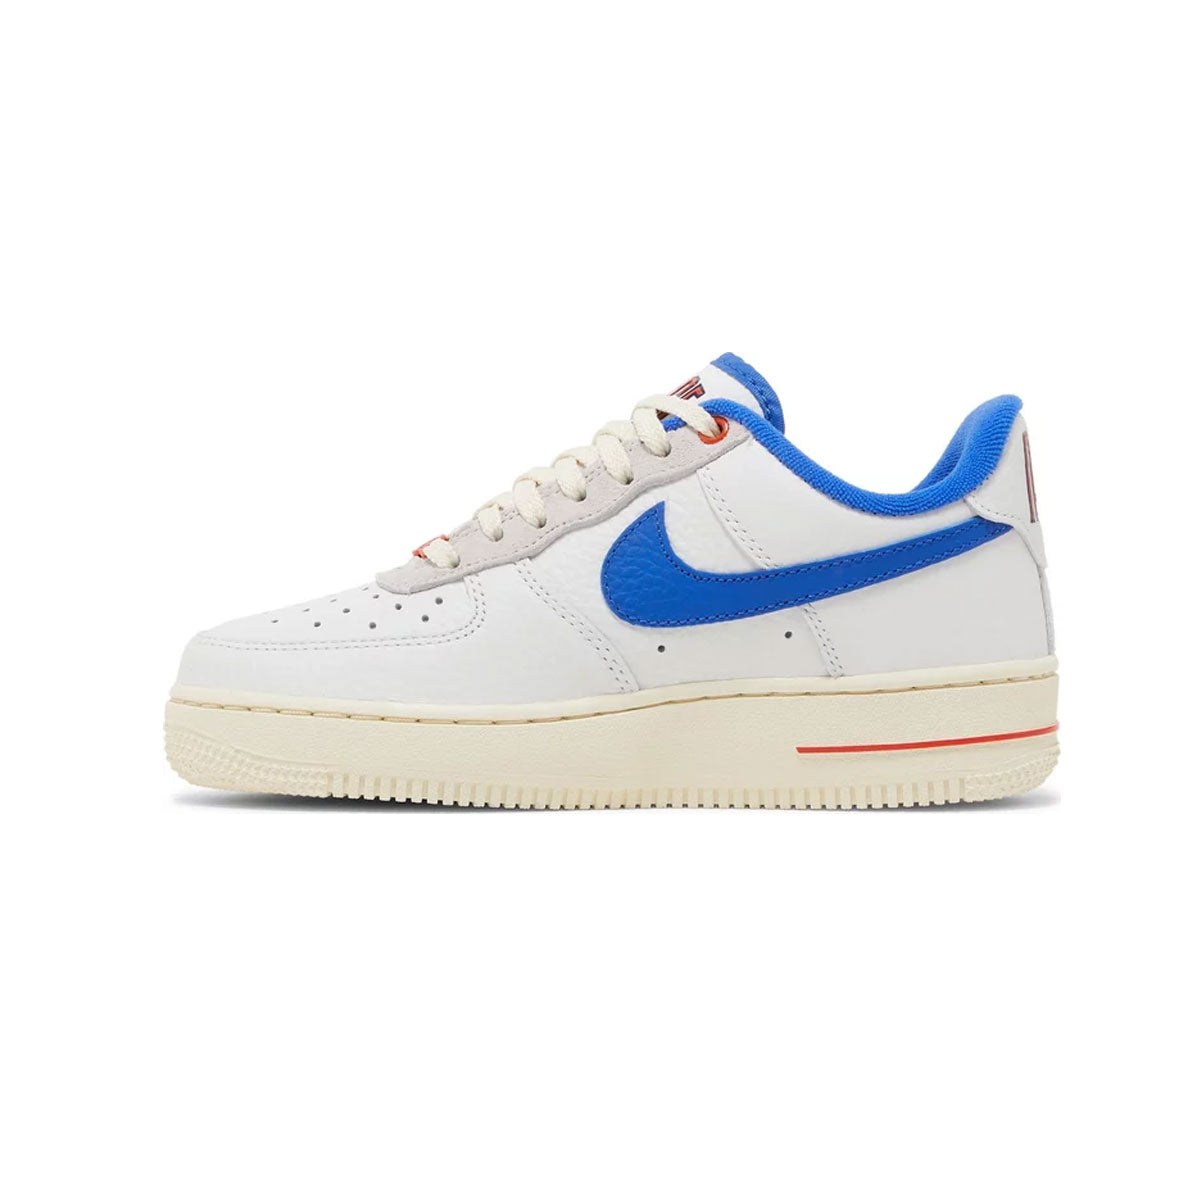 Nike Women's Air Force 1 Low '07 LX Command Force